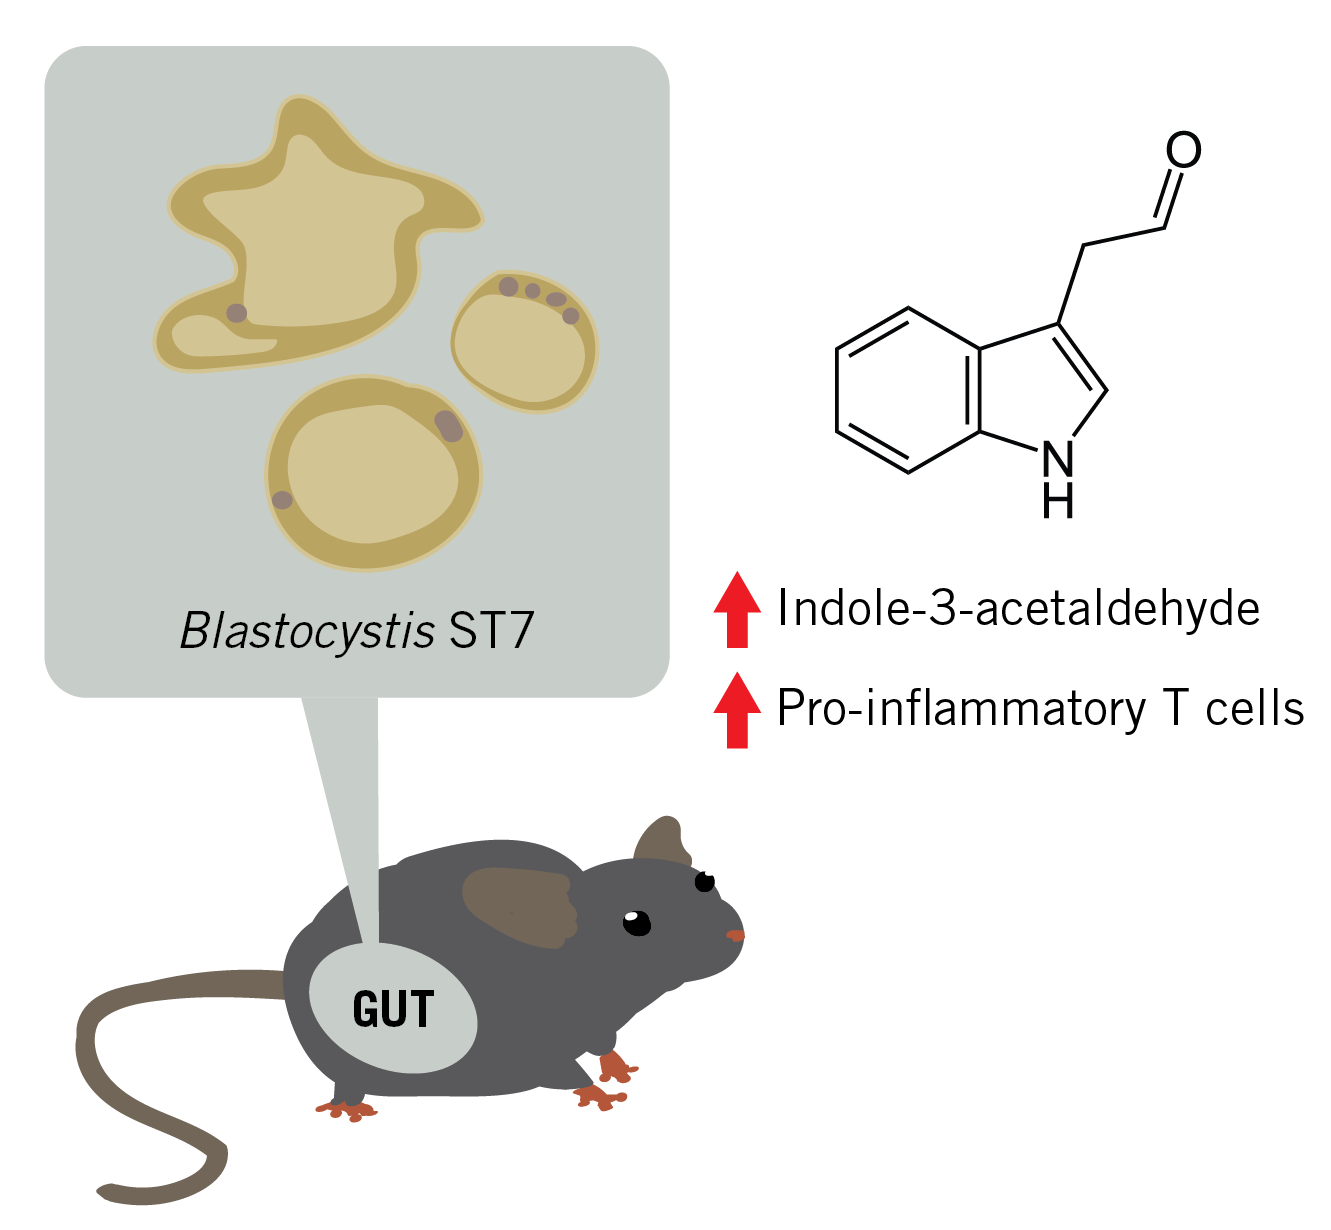 Graphic of a mouse highlighting Blastocystis ST7 in the gut and mechanism of upregulation of indole-3-acetaldehyde and pro-inflammatory T cells.